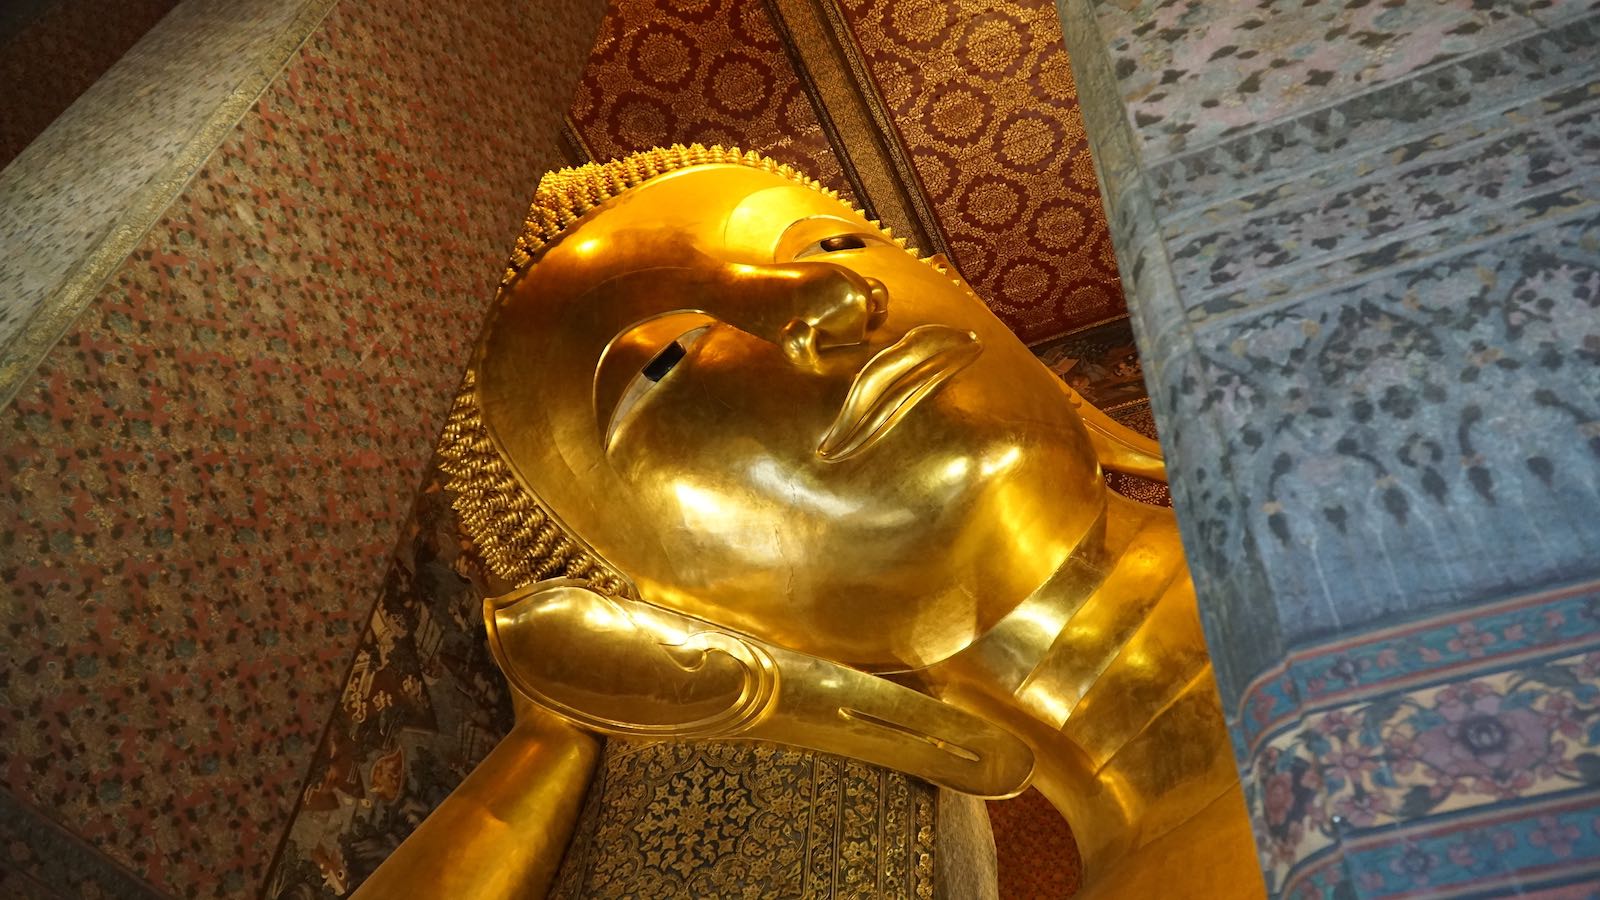 After the hectic sunrise by the riverbanks I went over to another temple complex called Wat Pho. Saw this giant golden super relaxed reclining Buddha who instantly became one of my role models in life.